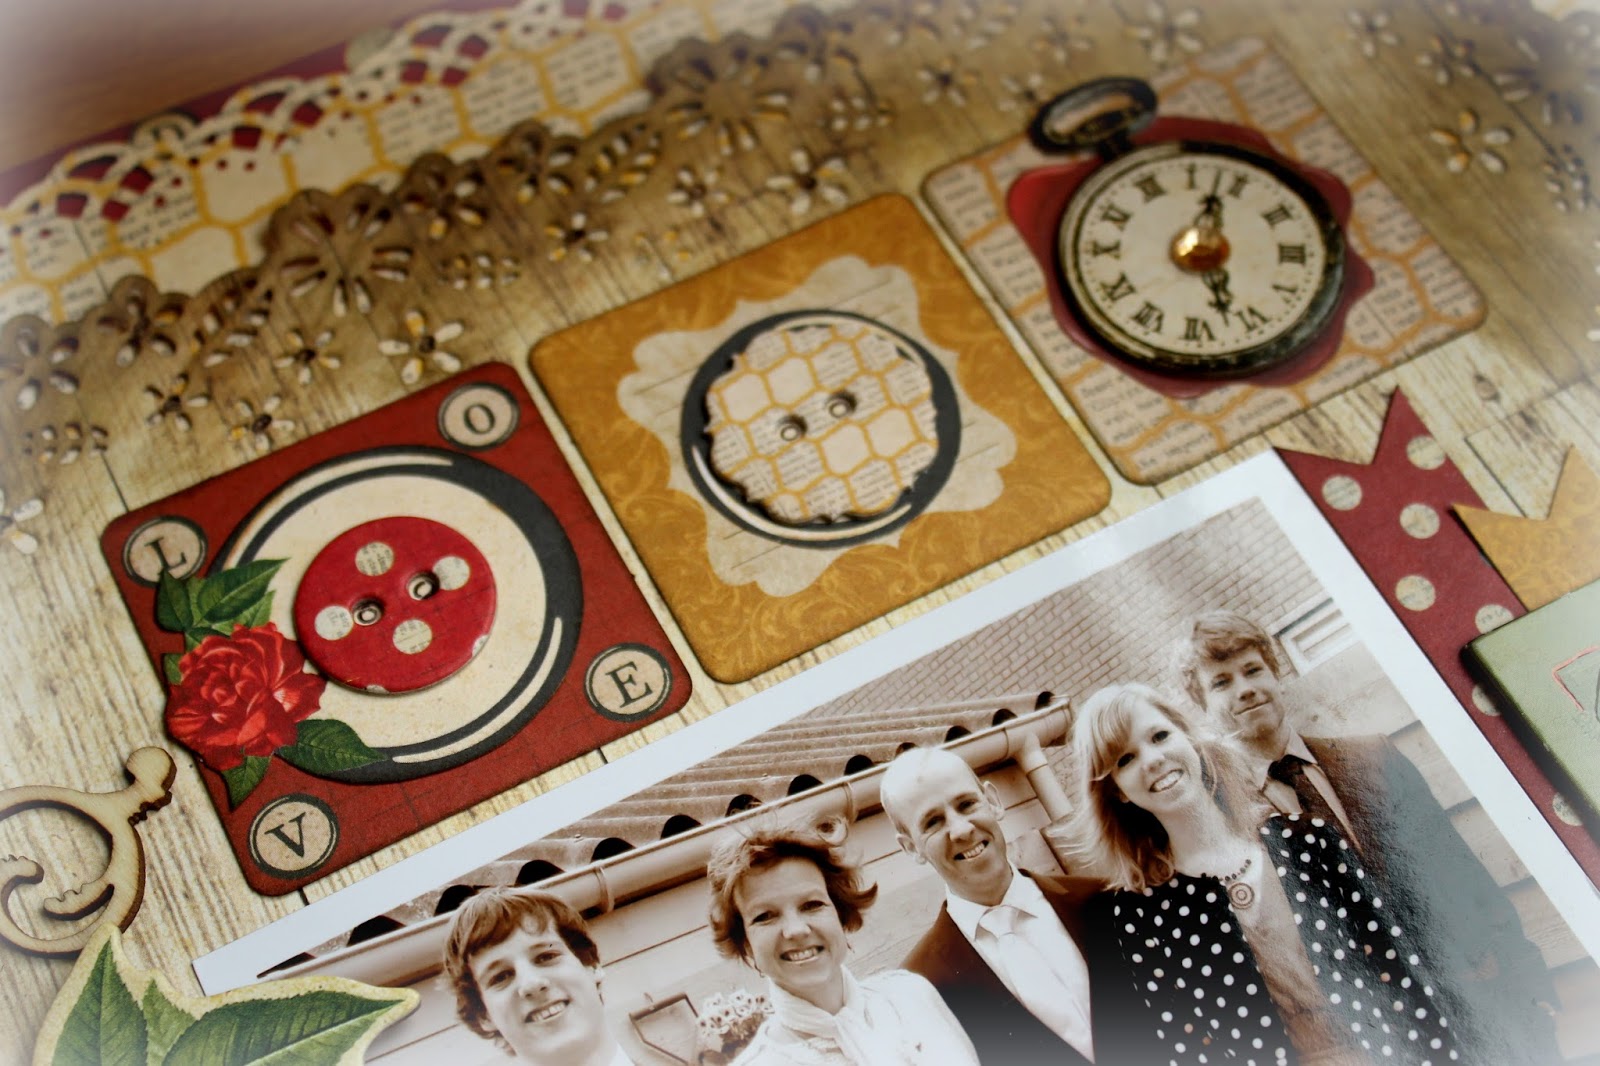 The BoBunny Blog: Family Heirlooms Scrapbook Layout with Beige and Brown  Color Scheme